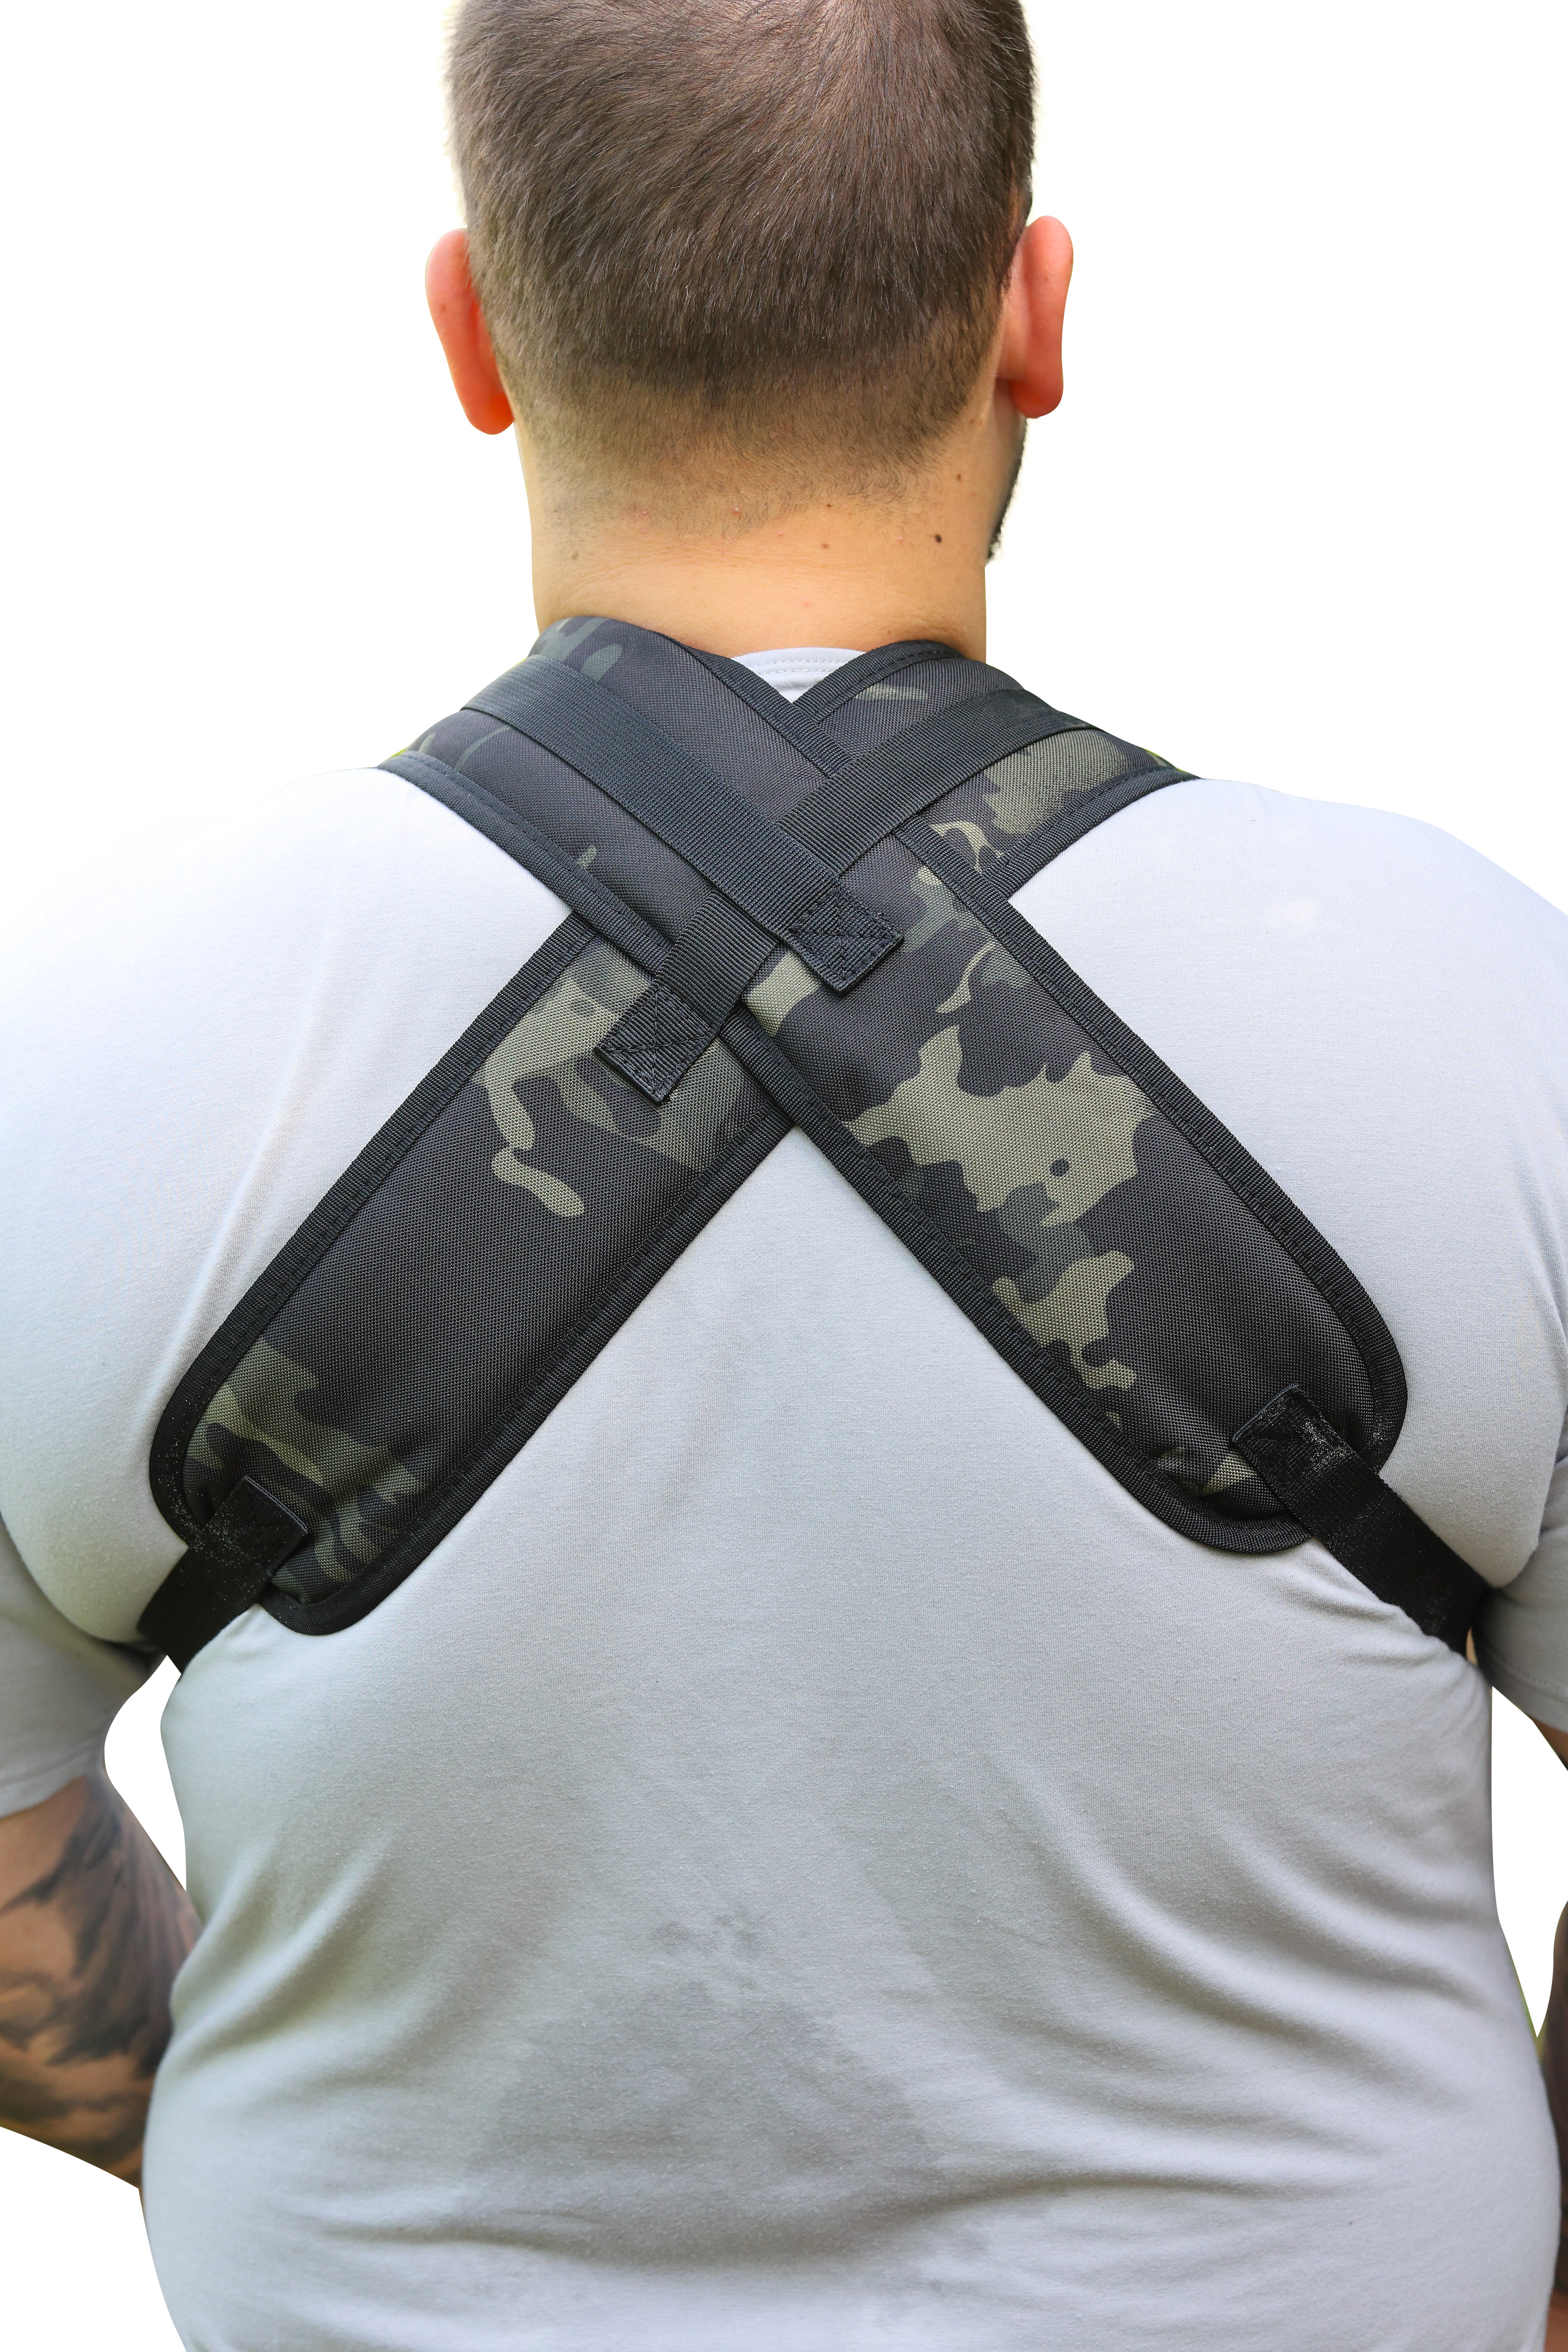 Tactic Military Baby Toddler Carrier Sling - Black Camo